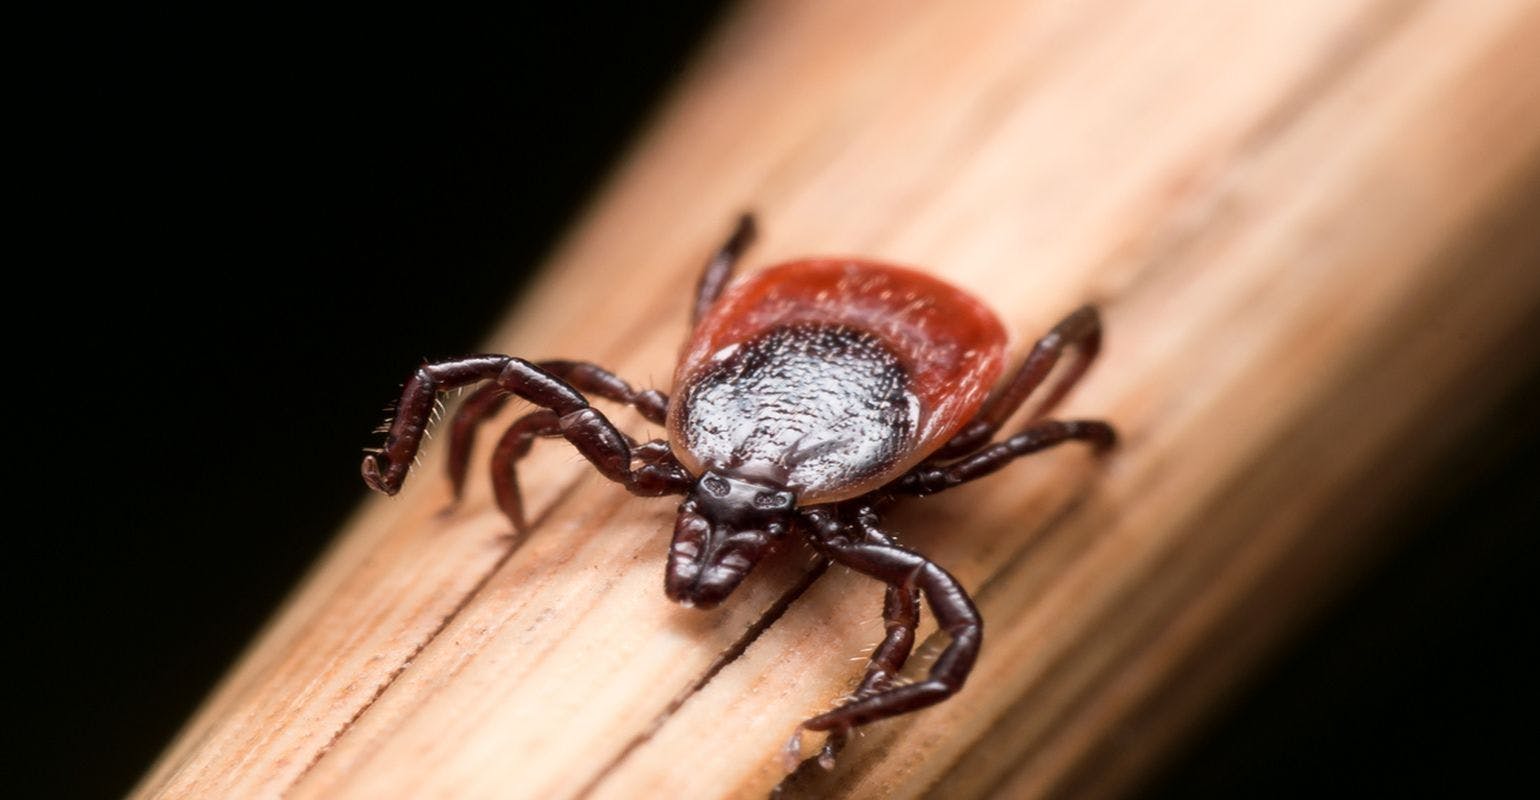 Record Number of Tickborne Diseases Reported in U.S. in 2017